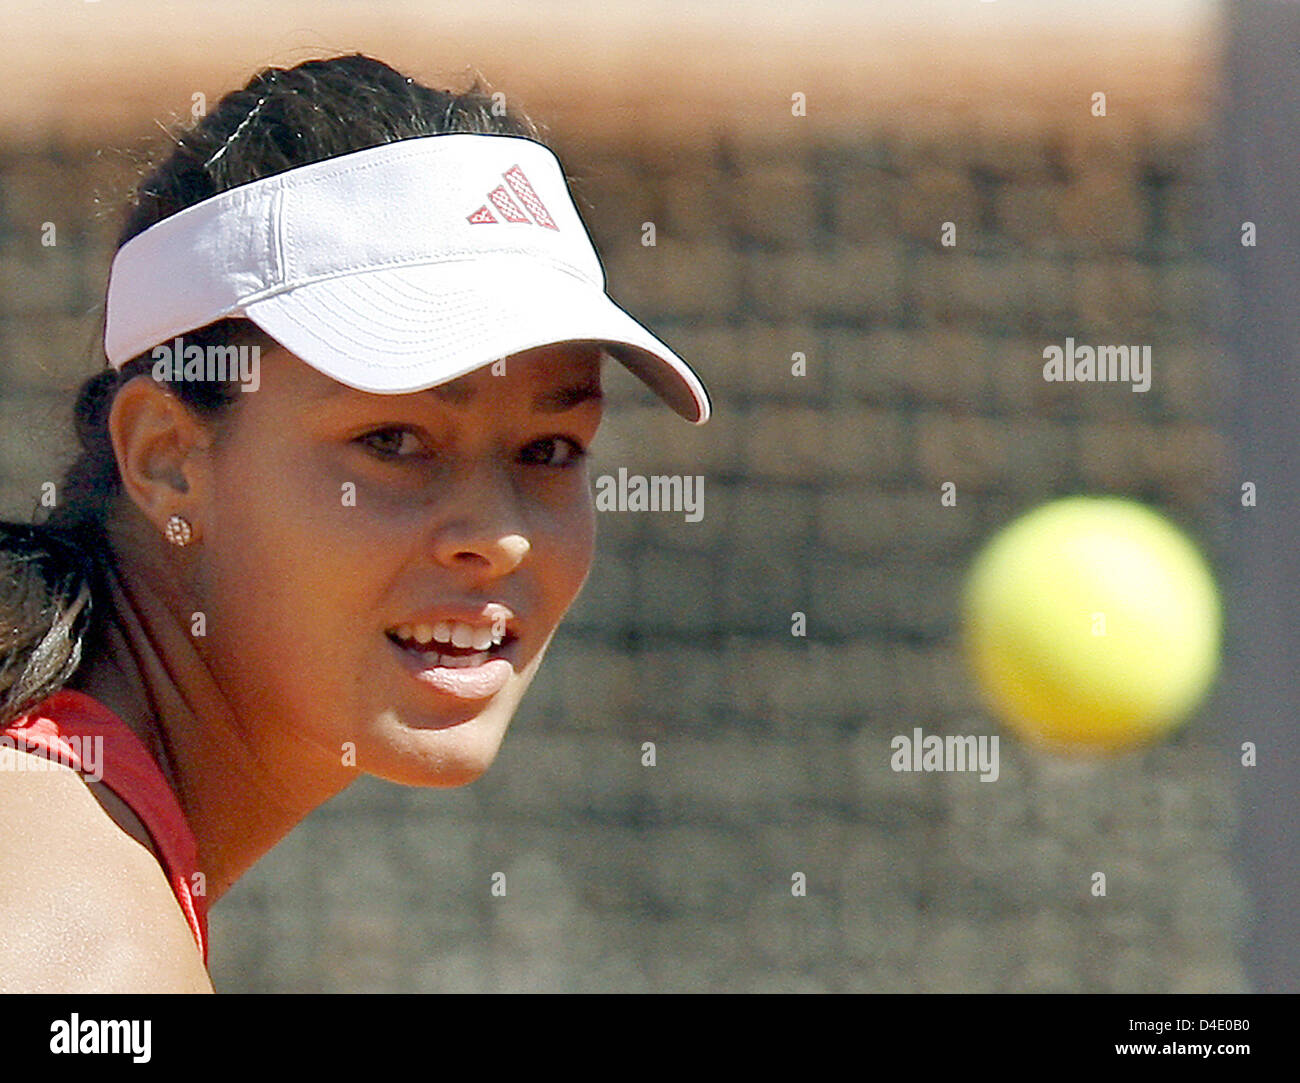 Ana Ivanovic of Serbia returns a backhand to Agnes Szavay of Hungary in their WTA German Open quarter-finals match in Berlin, Germany, 09 May 2008. Photo: Wolfgang Kumm Stock Photo